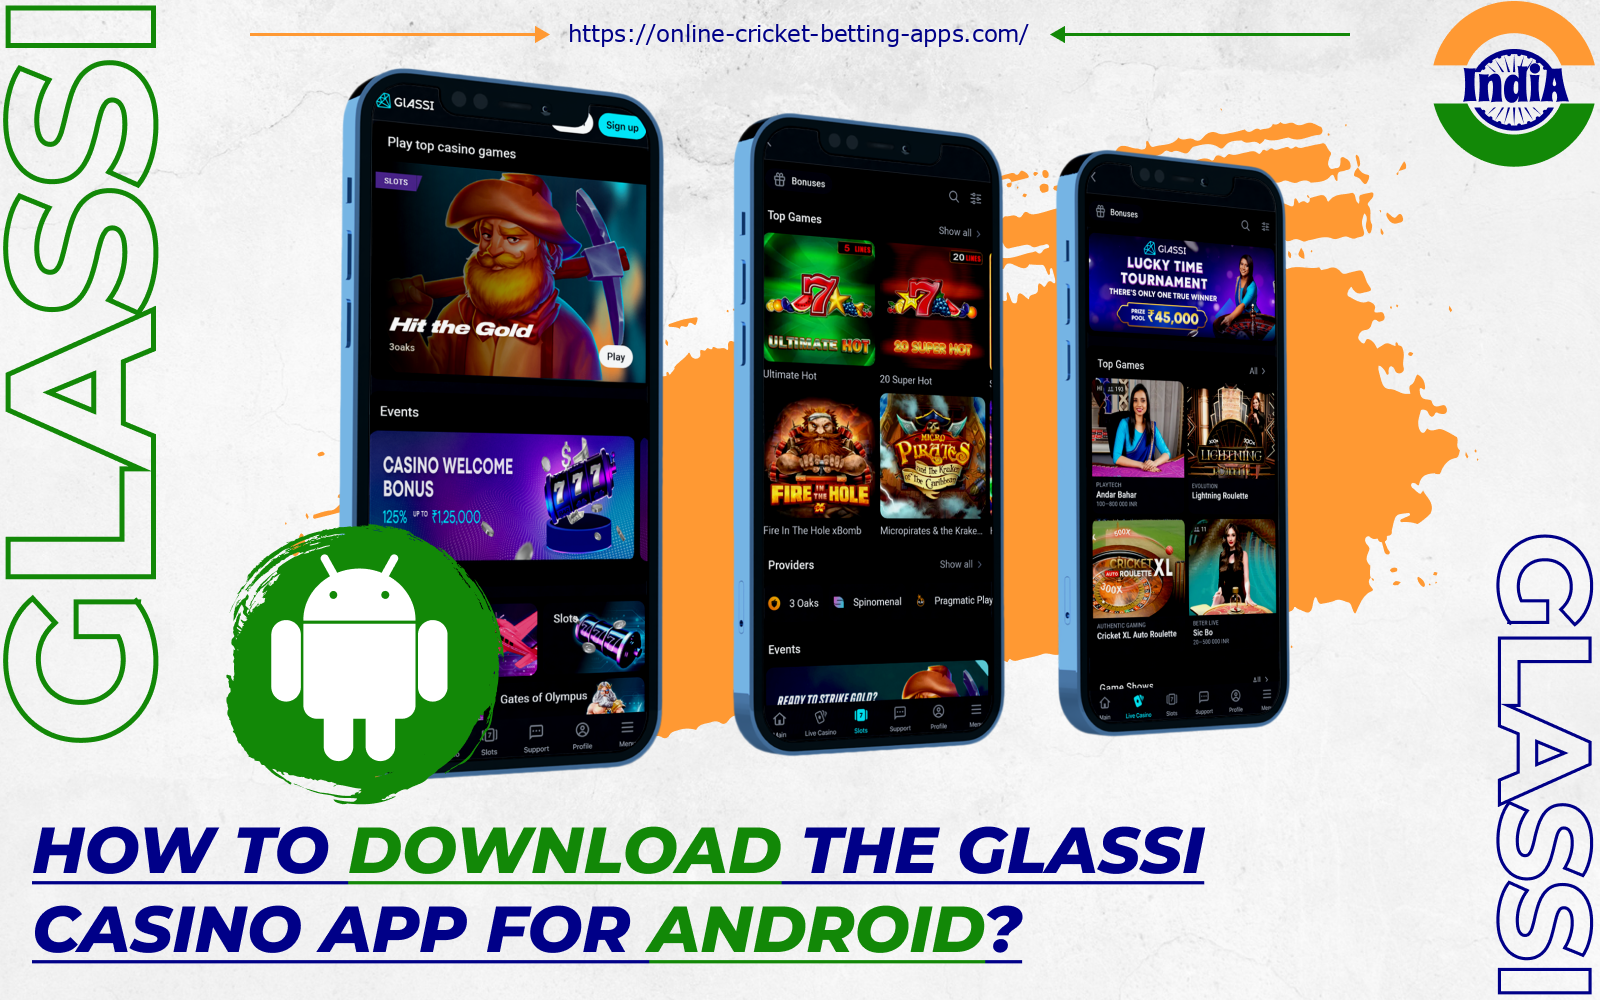 Glassi's Android app allows Indian users to bet and play casino games at any convenient moment